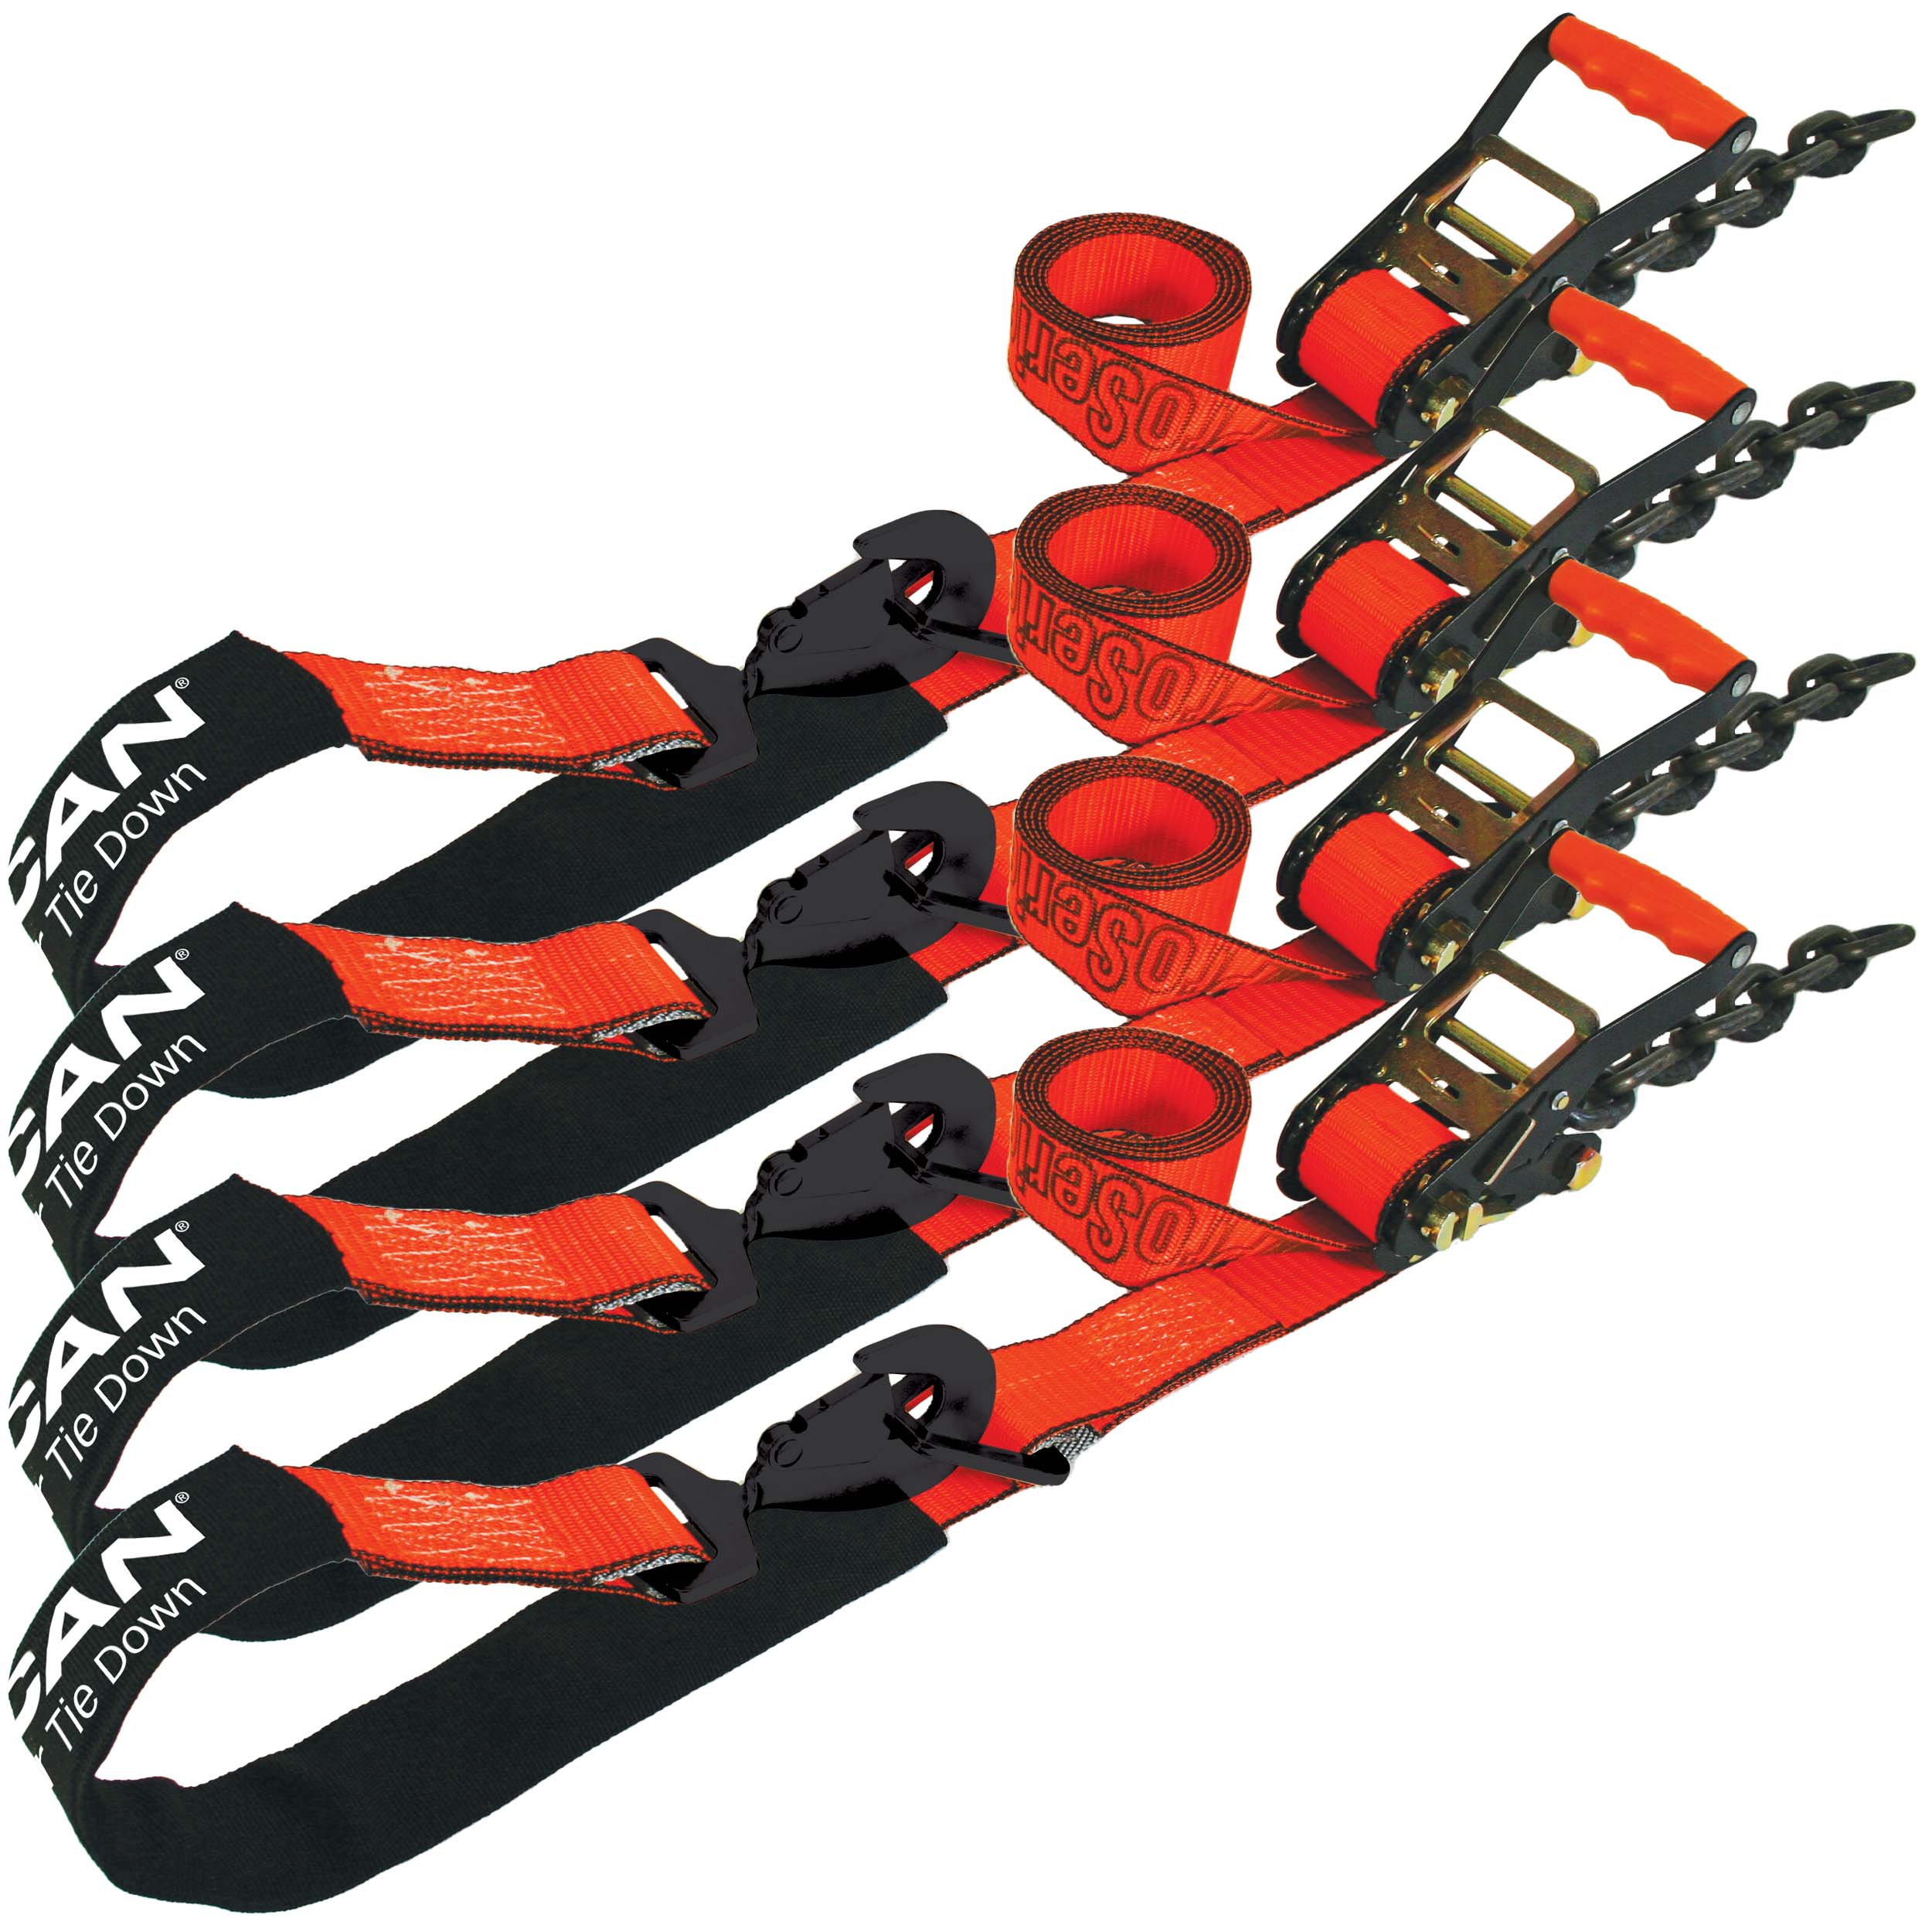 Professional Grade Tow Truck Axle Strap With Chain Tails | Truck n Tow.com